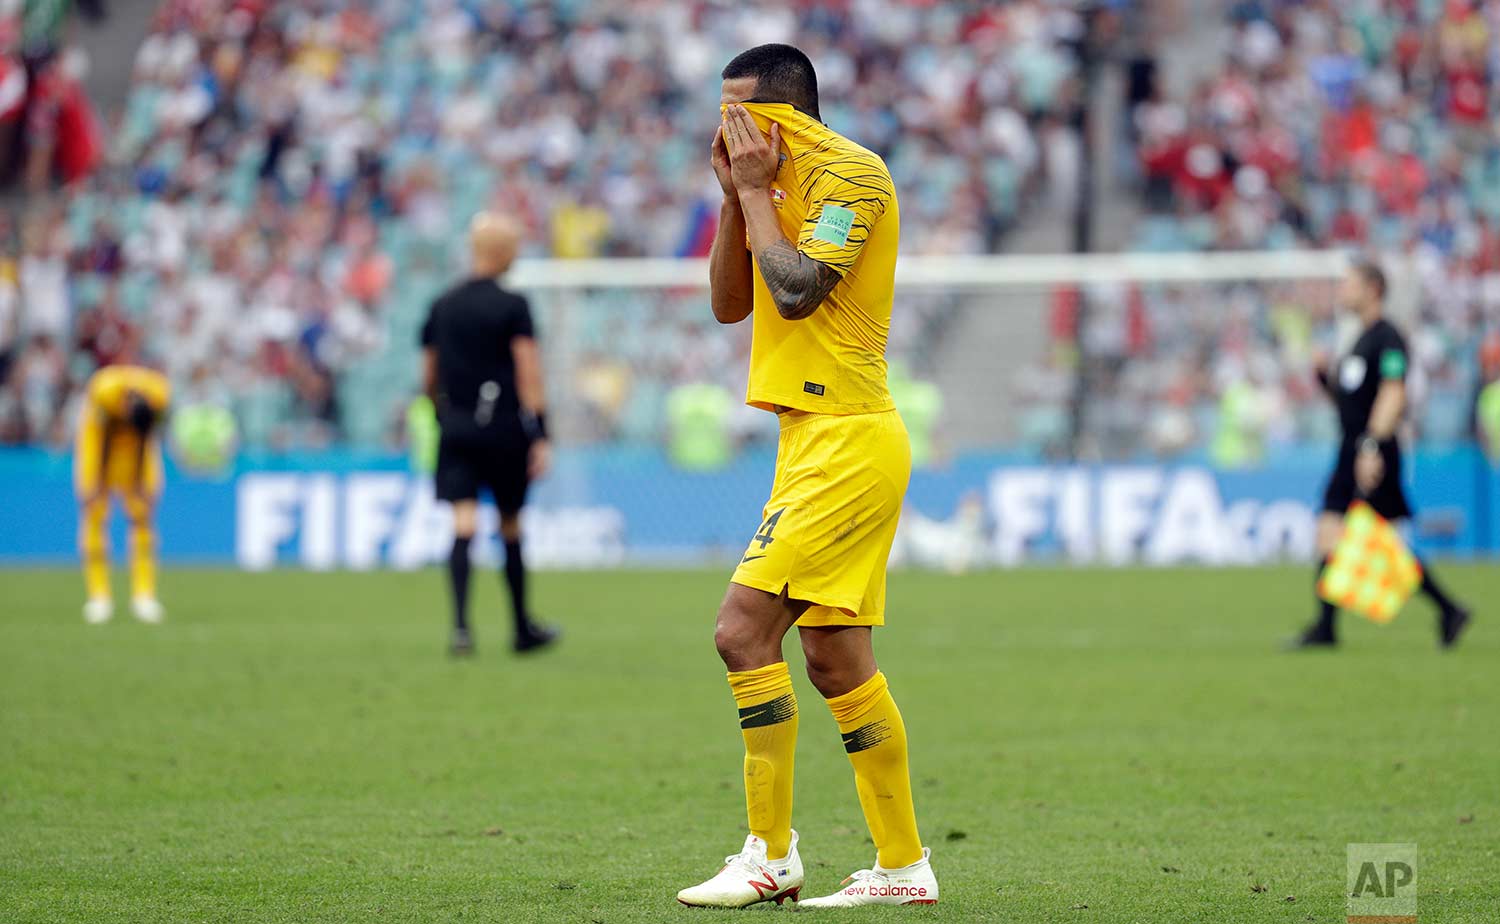  Australia's Tim Cahill reacts in dejection at the end of the group C match between Australia and Peru, at the 2018 soccer World Cup in the Fisht Stadium in Sochi, Russia, Tuesday, June 26, 2018. Peru won 2-0. (AP Photo/Gregorio Borgia) 